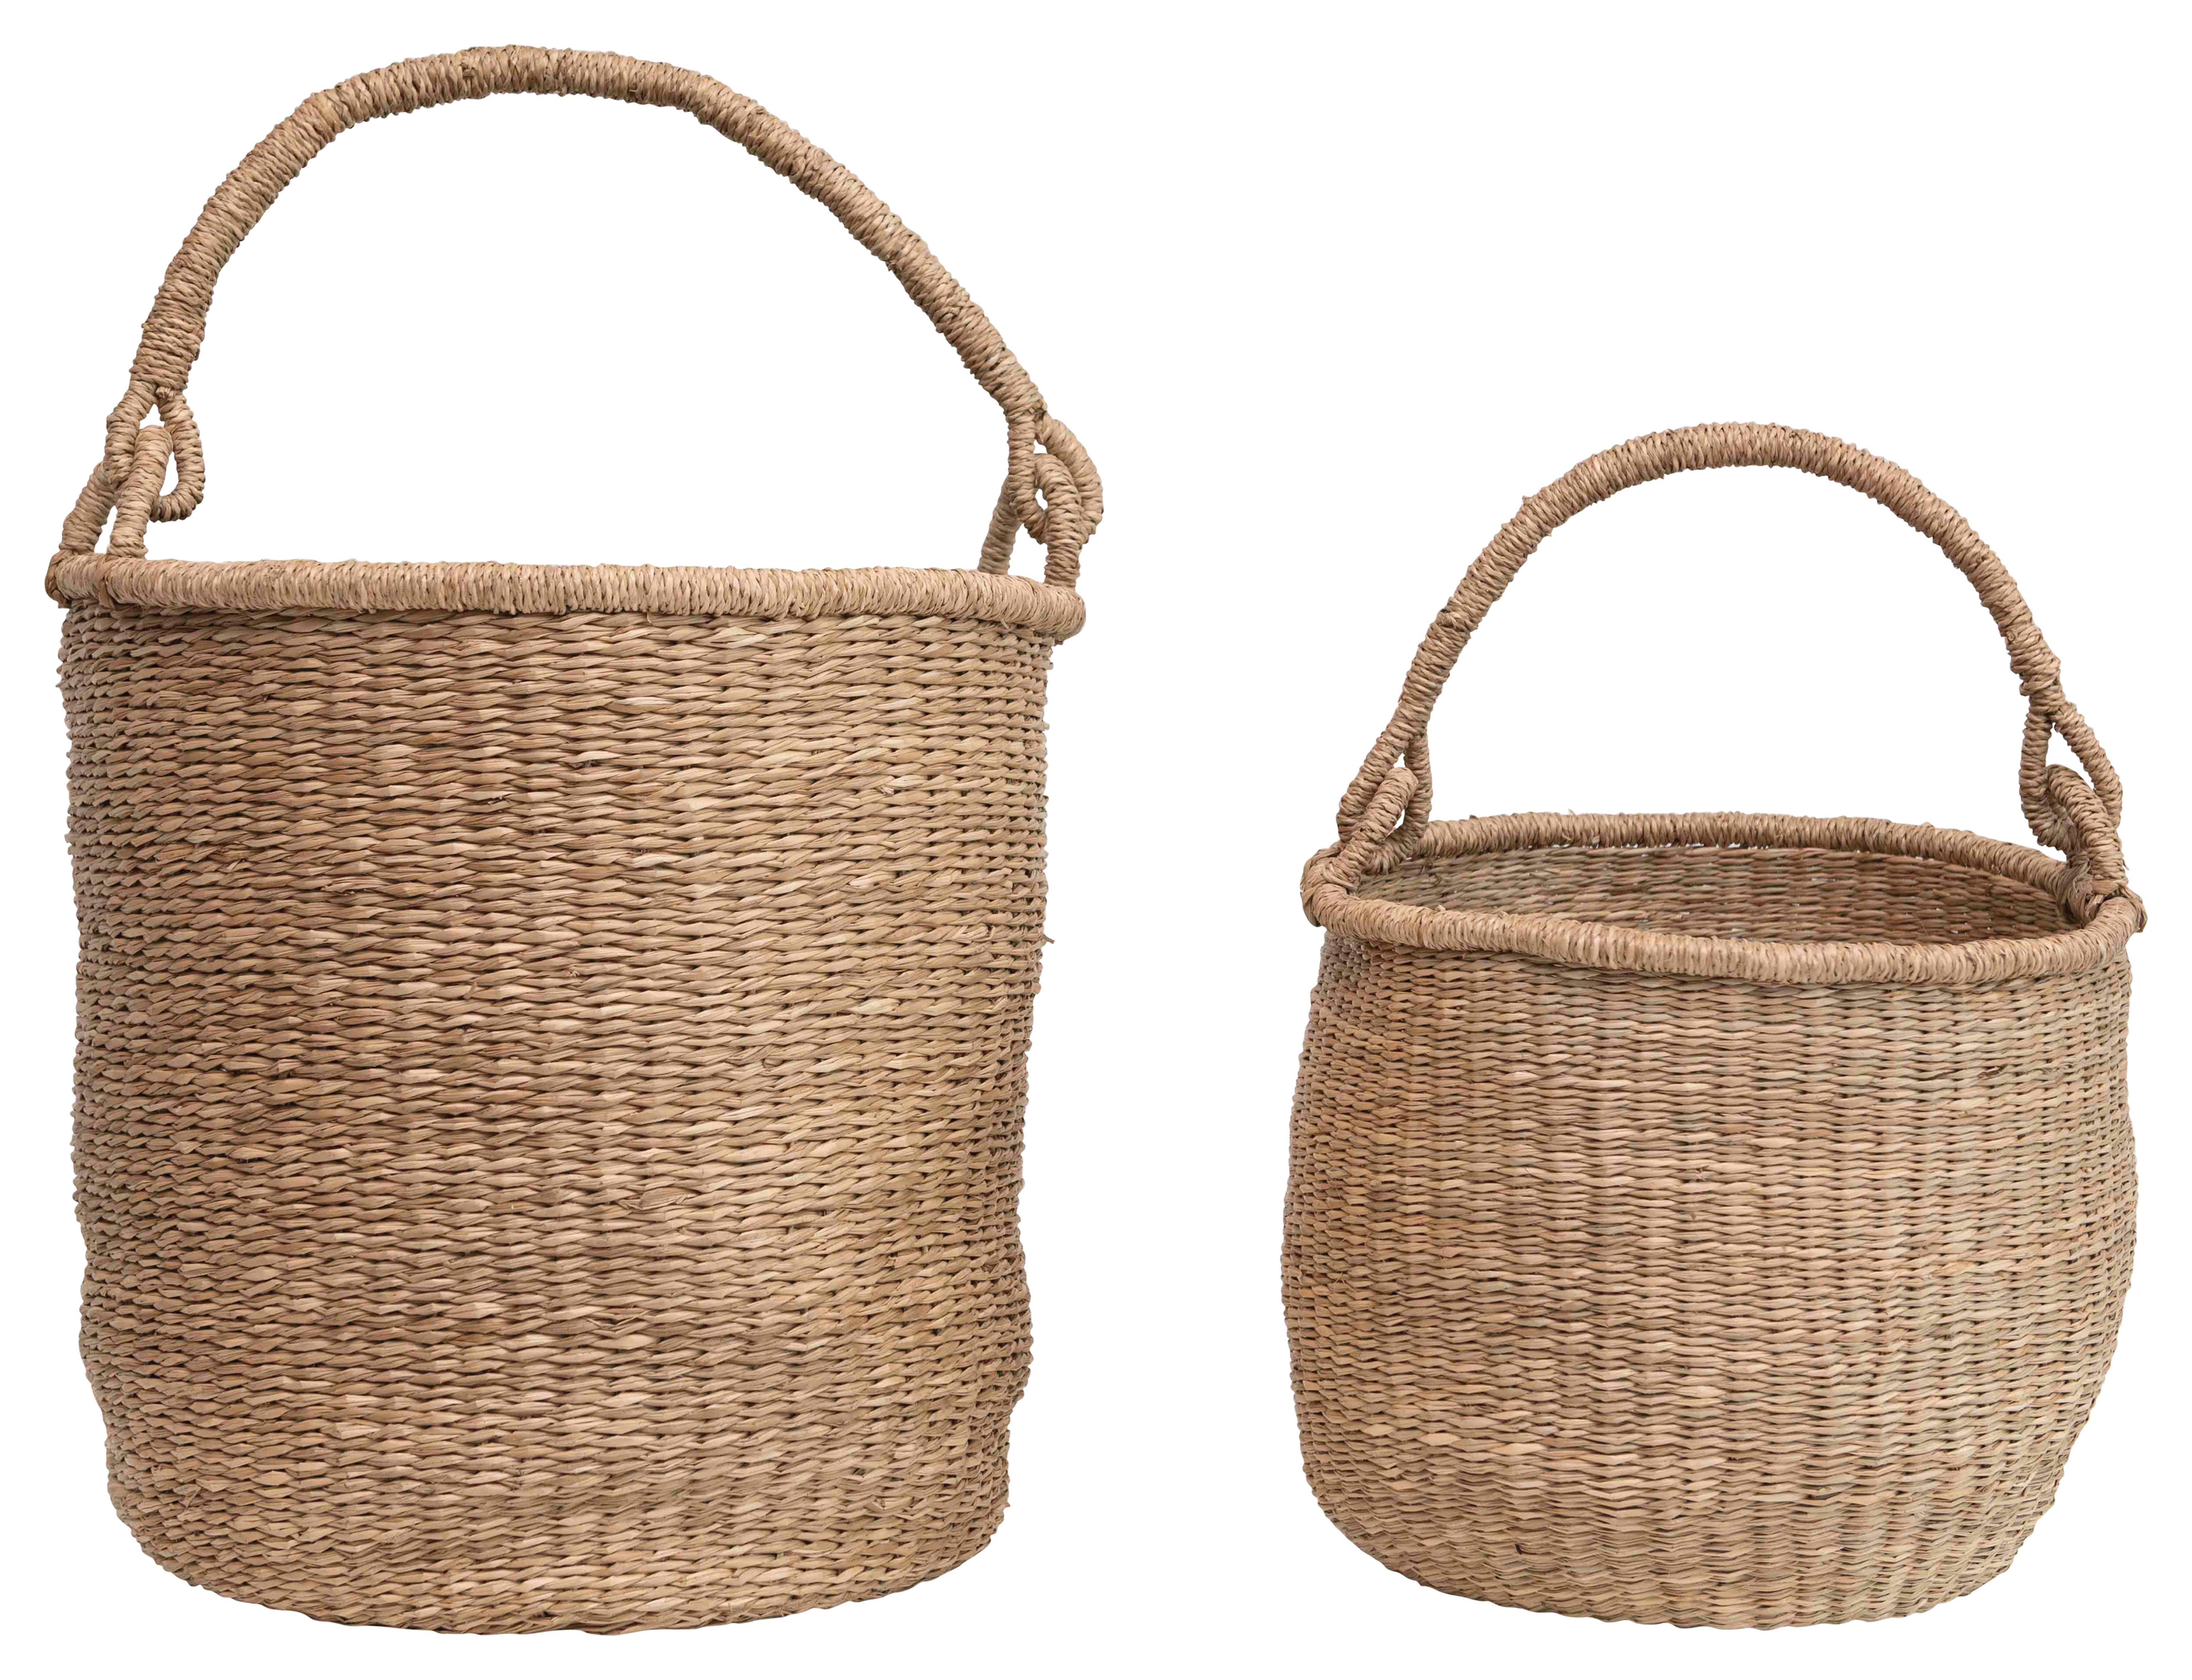 20.5" & 16" Handwoven Seagrass Baskets with Handles (Set of 2 Sizes) - Nomad Home